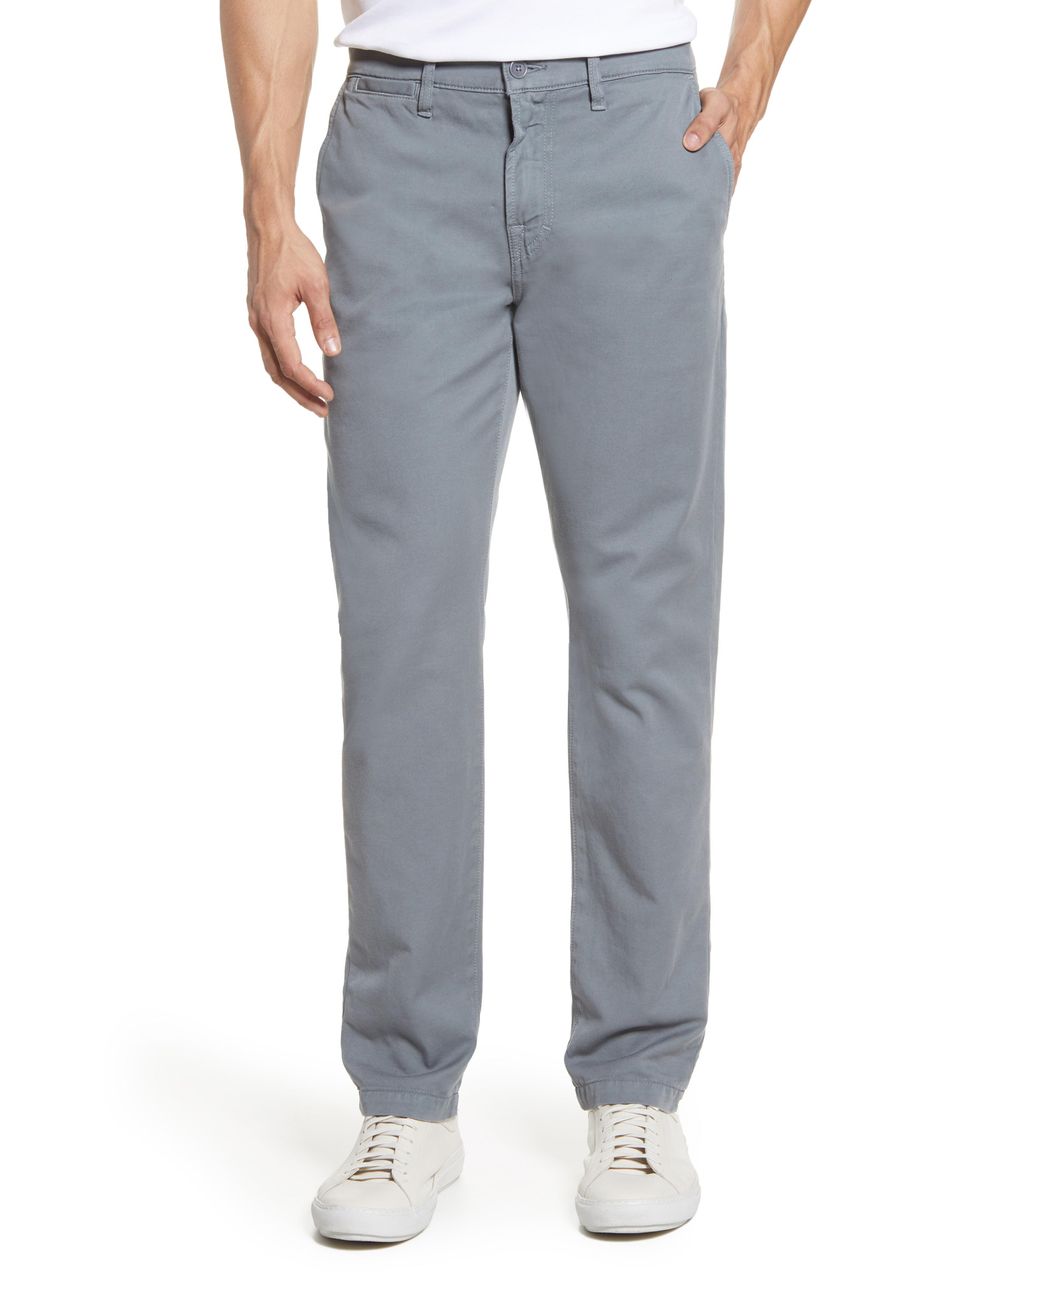 7 For All Mankind Cotton 7 For All Mankind Go-to Chino Pants in Gray ...